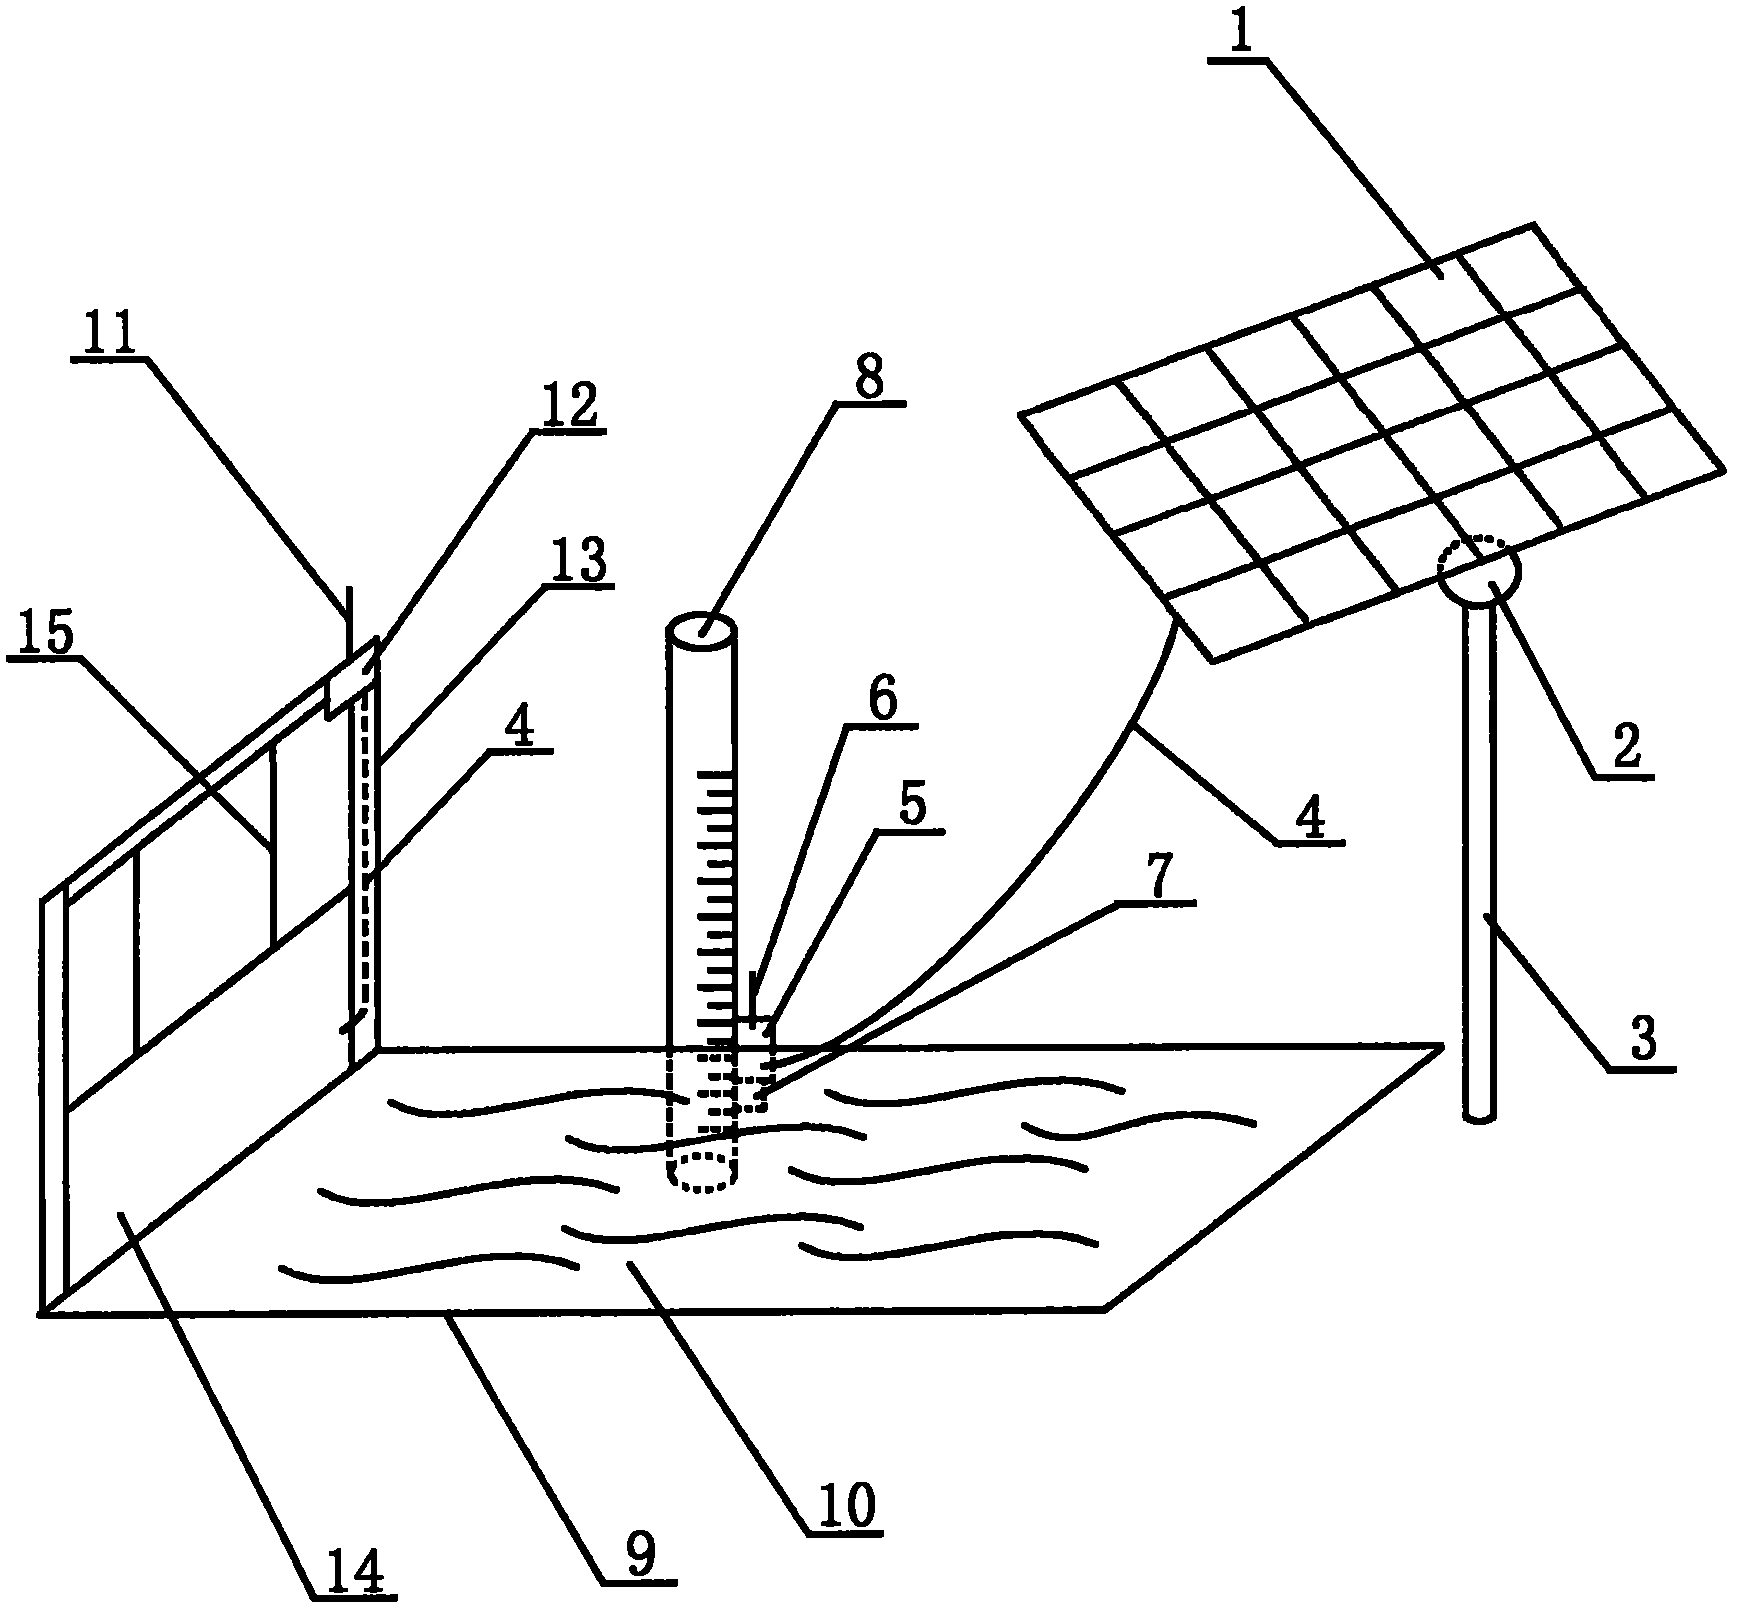 Water level measurement and forecast device using solar photovoltaic power generation system to supply power to water level sensor